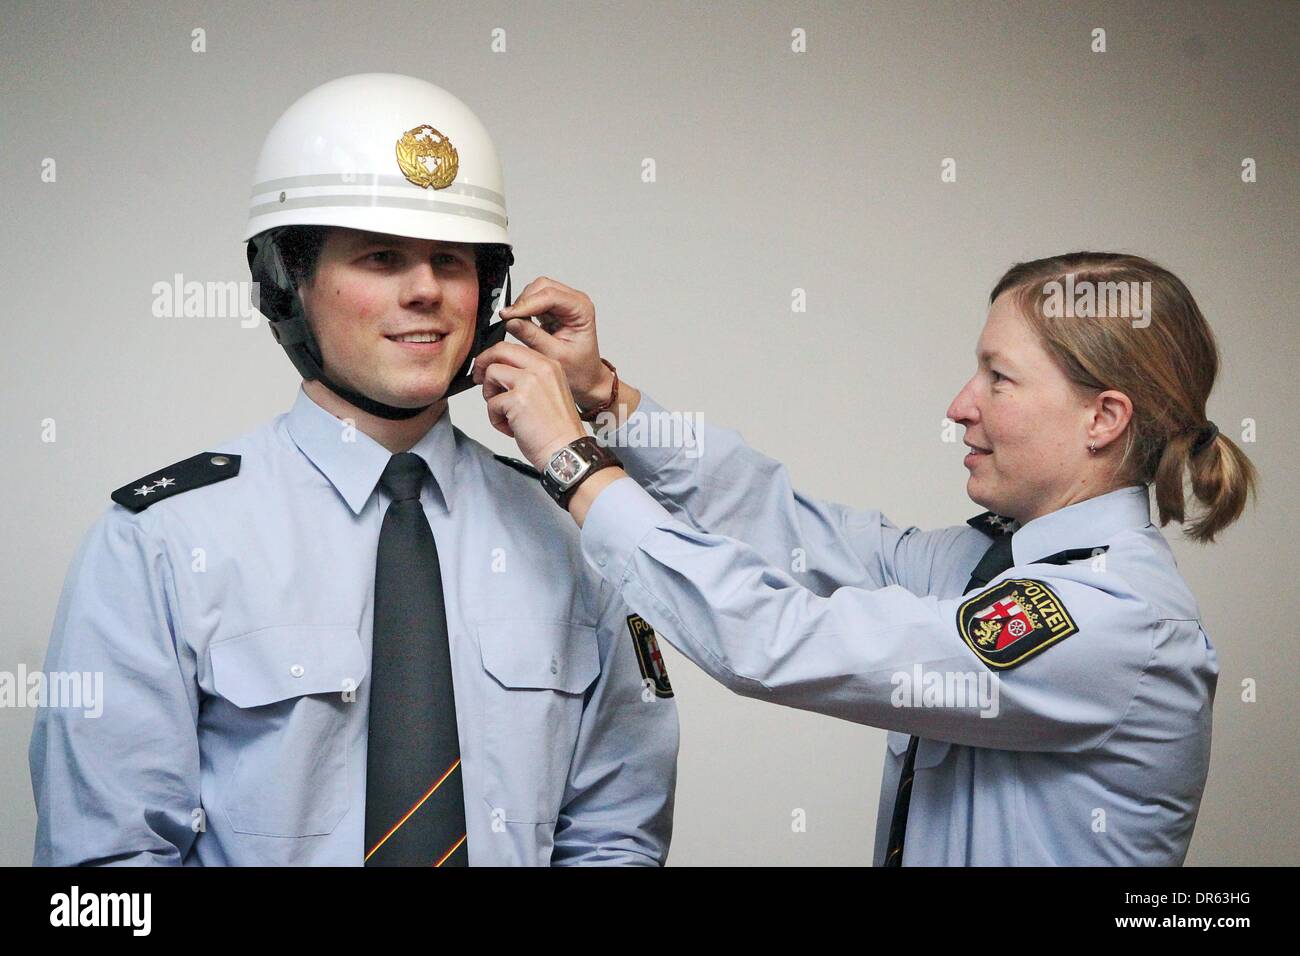 Mainz, Germany. 20th Jan, 2014. Police officer Anette Stacher helps her colleague matthias Zindel put ona police helmet from Japan at the police headquarters in Mainz, Germany, 20 January 2014. The police headquarters made it into the Guinness Book of Records with their collection of 519 police hats. Photo: FREDRIK VON ERICHSEN/dpa/Alamy Live News Stock Photo